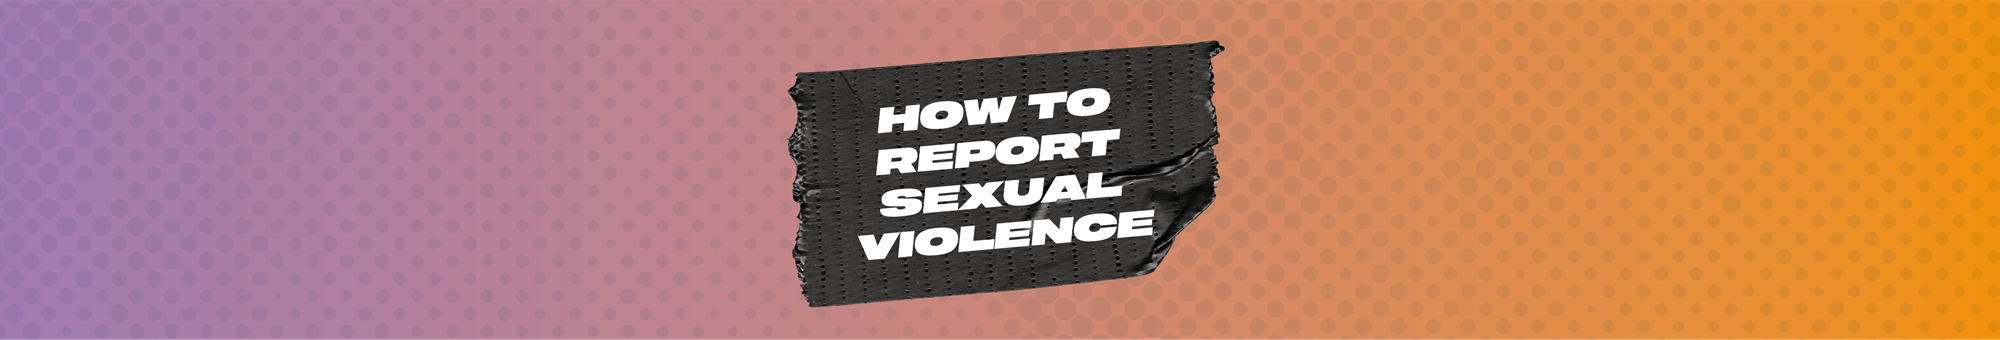 How to report sexual violence as a UCA student